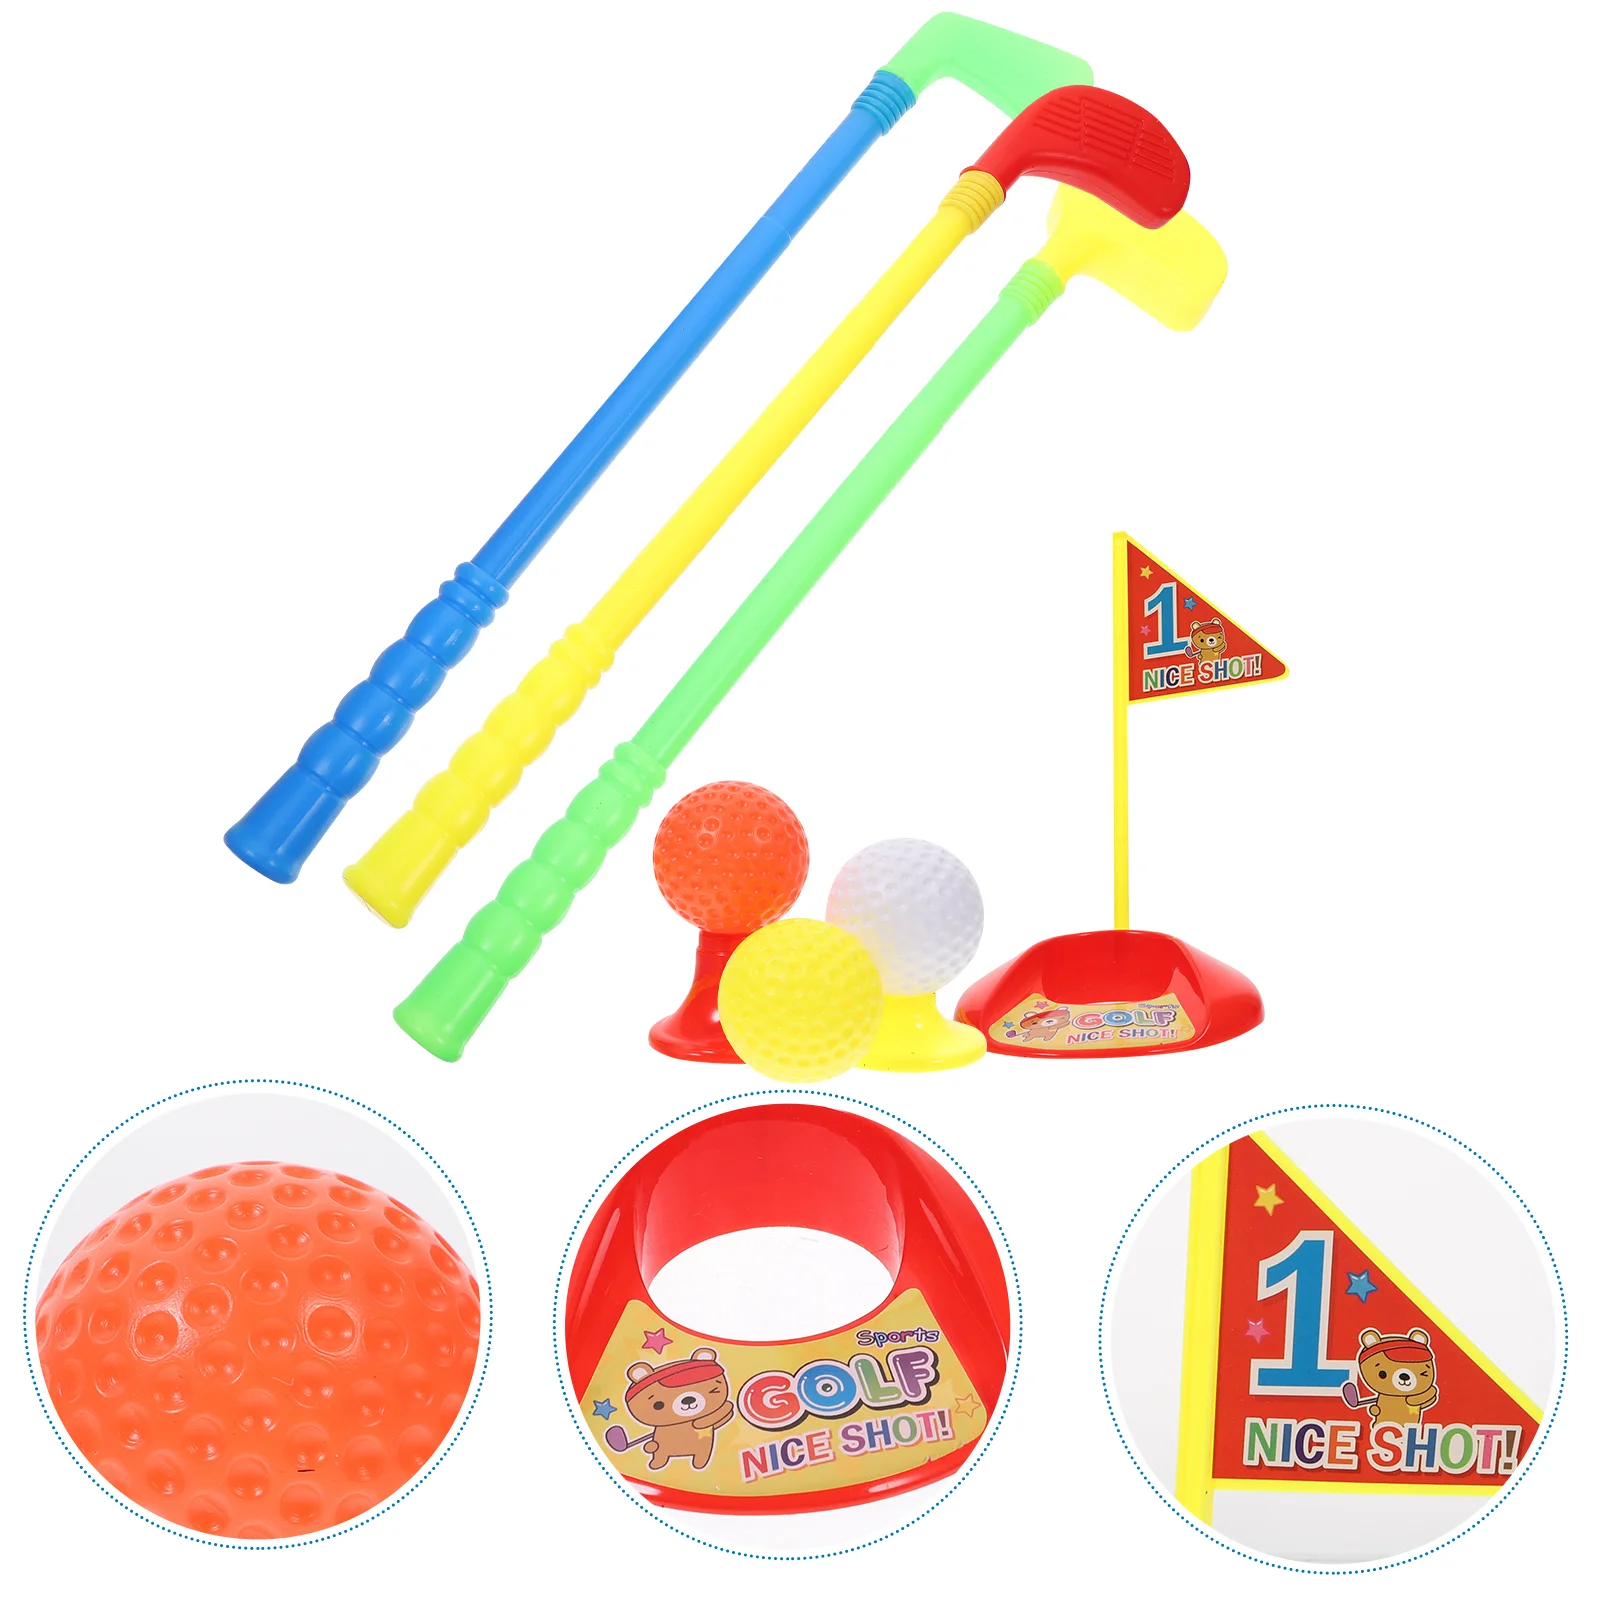 

Set Toy Kids Clubs Mini Toys Club Game Indoor Educational Playgolfing Toddler Suitssets Suitcase Playse Sett Garden Playset